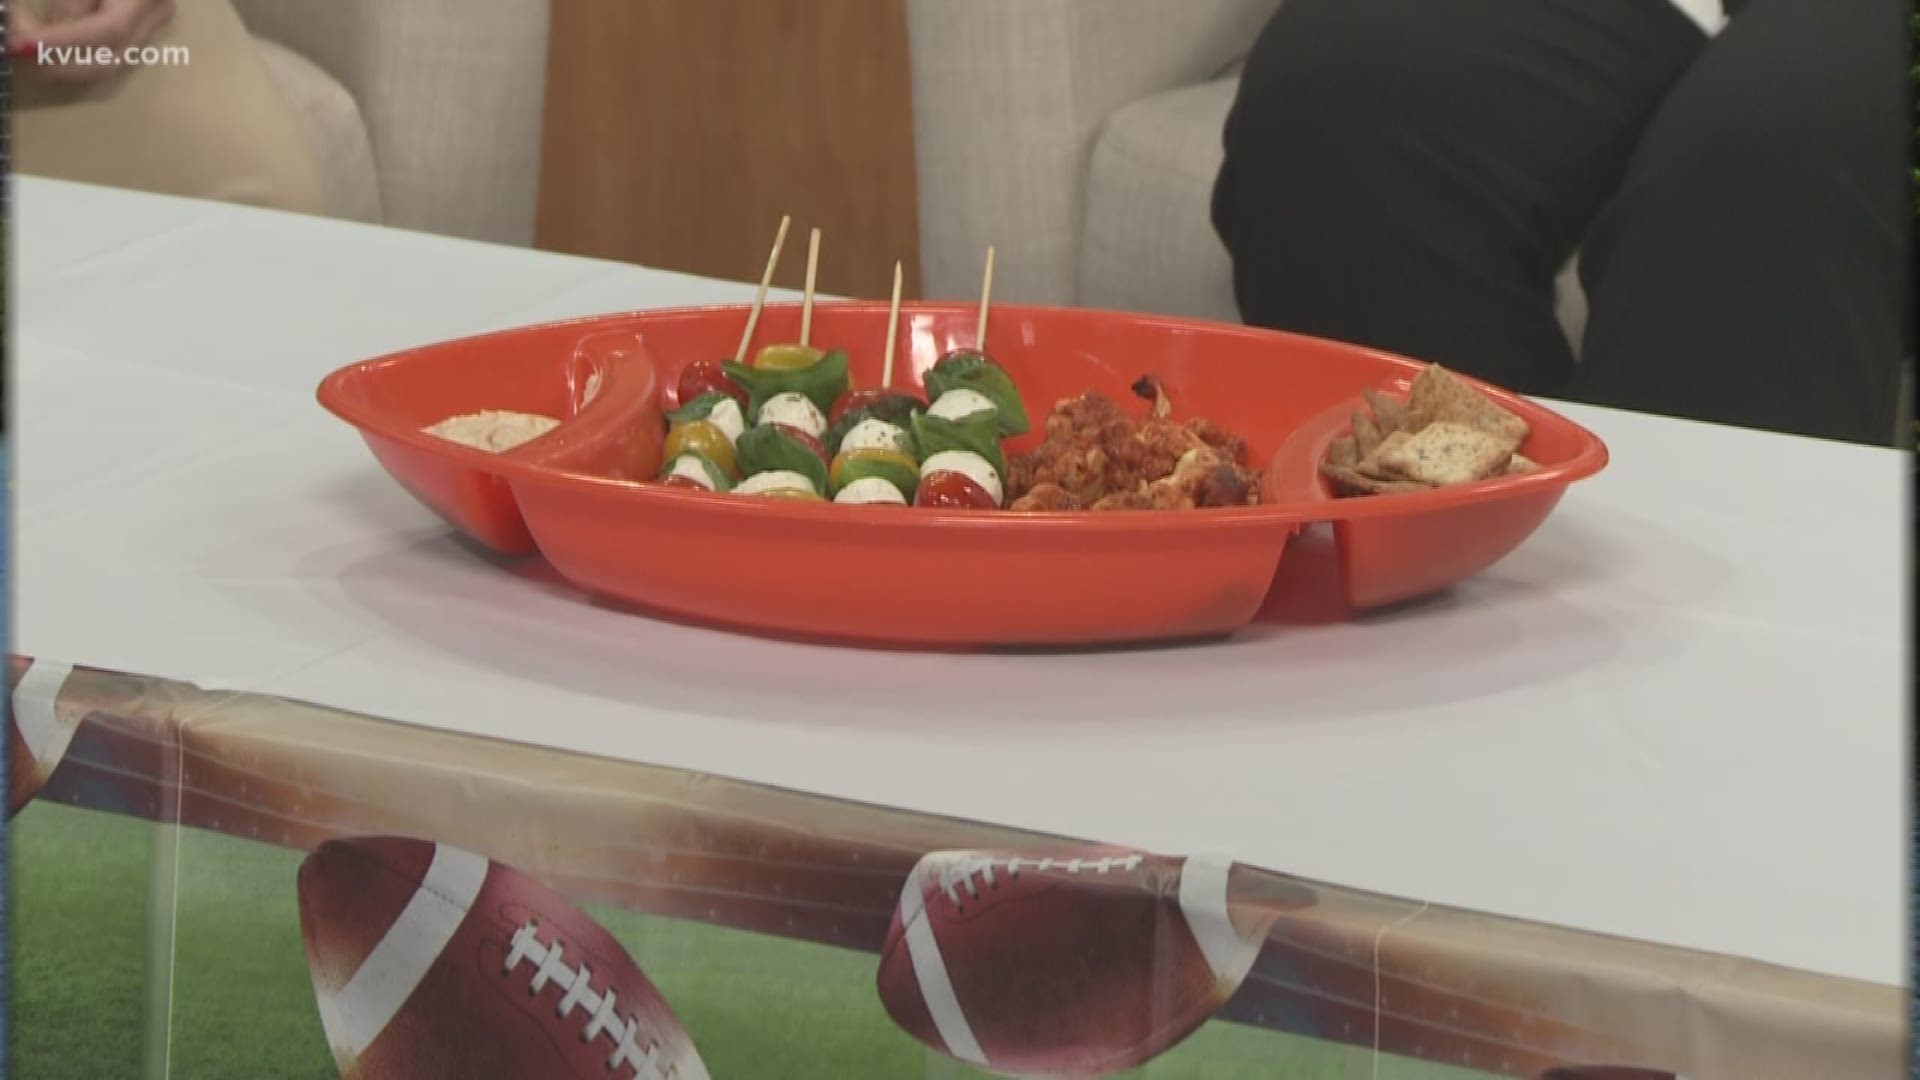 As you prepare your Super Bowl spread, don’t forget to add some healthy snack options.